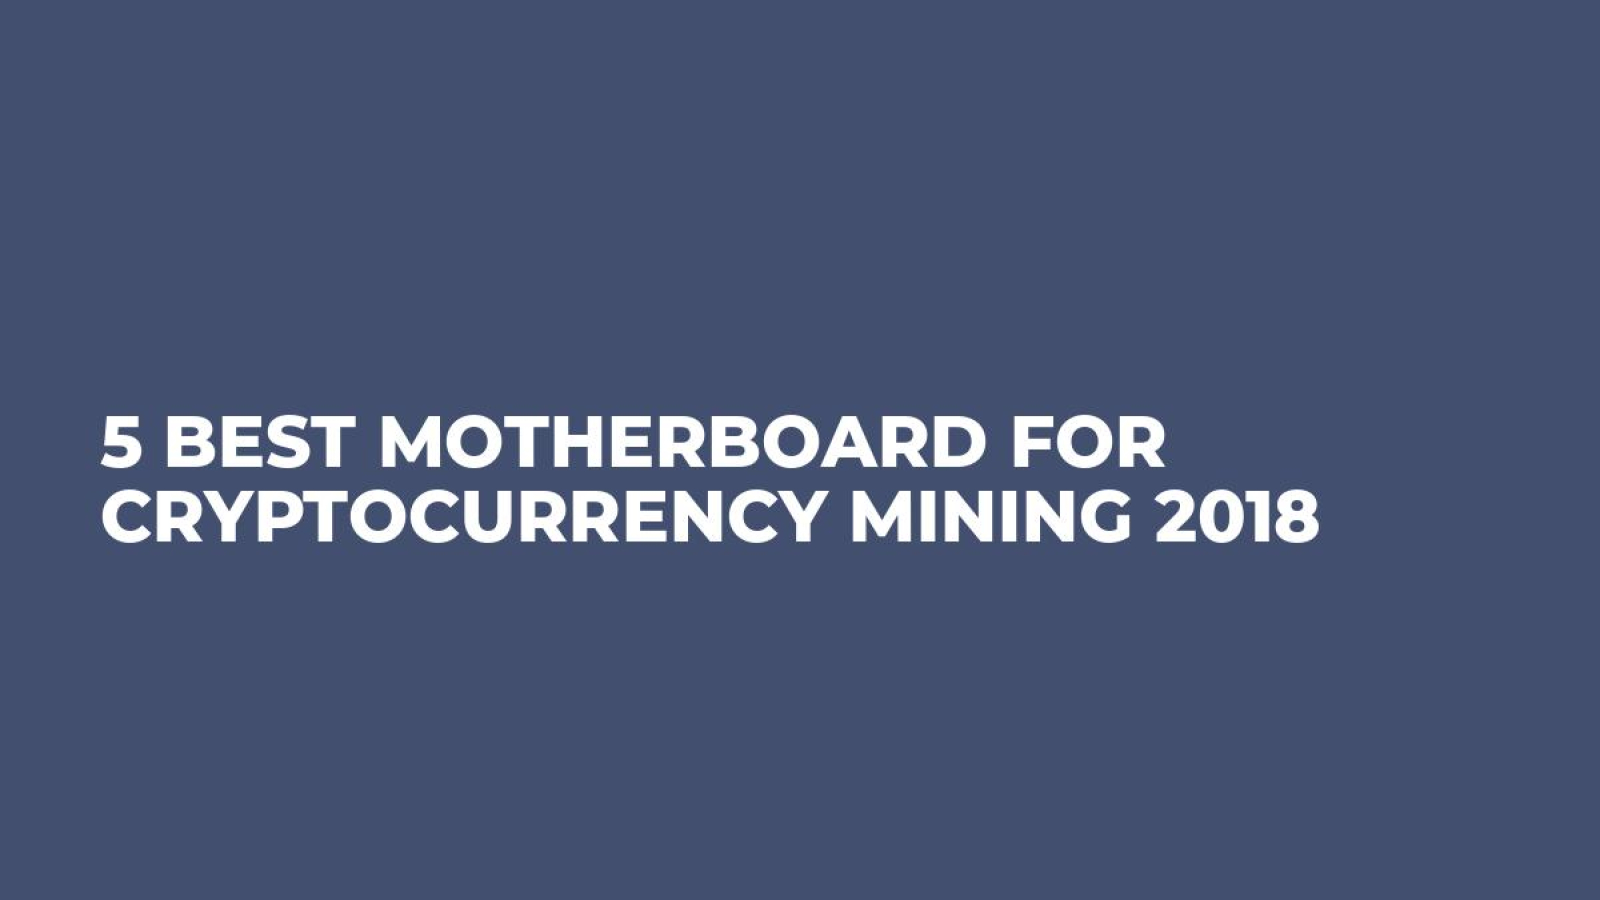 5 Best Motherboard for Cryptocurrency Mining 2018